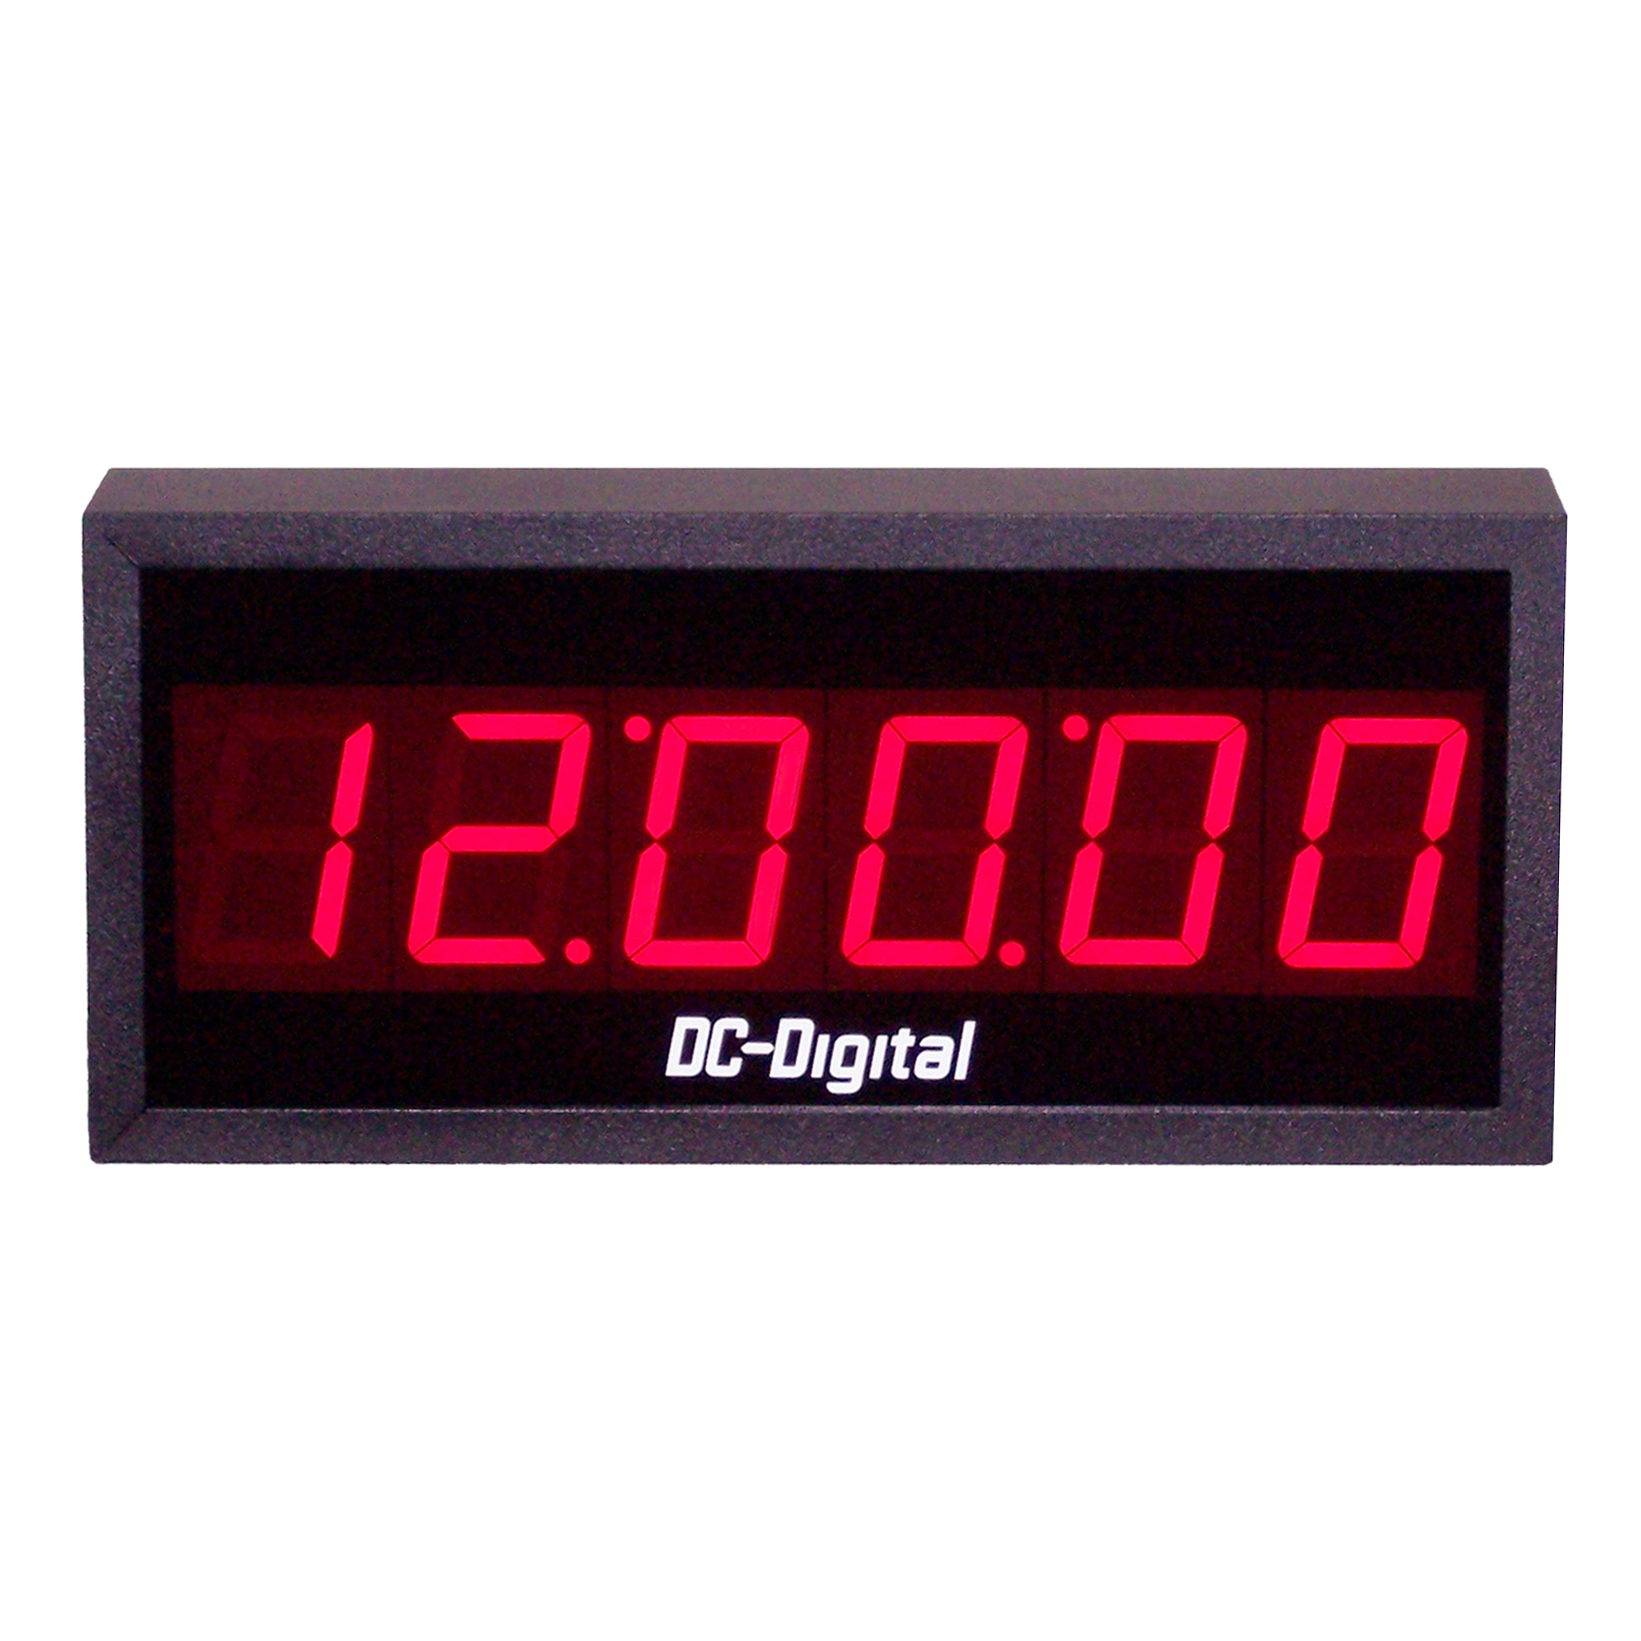 (DC-256N-POE) 2.3 Inch LED, 6 Digit, Network NTP Server Synchronized, Web Page Configurable, POE Powered, Atomic Digital Time of Day Clock